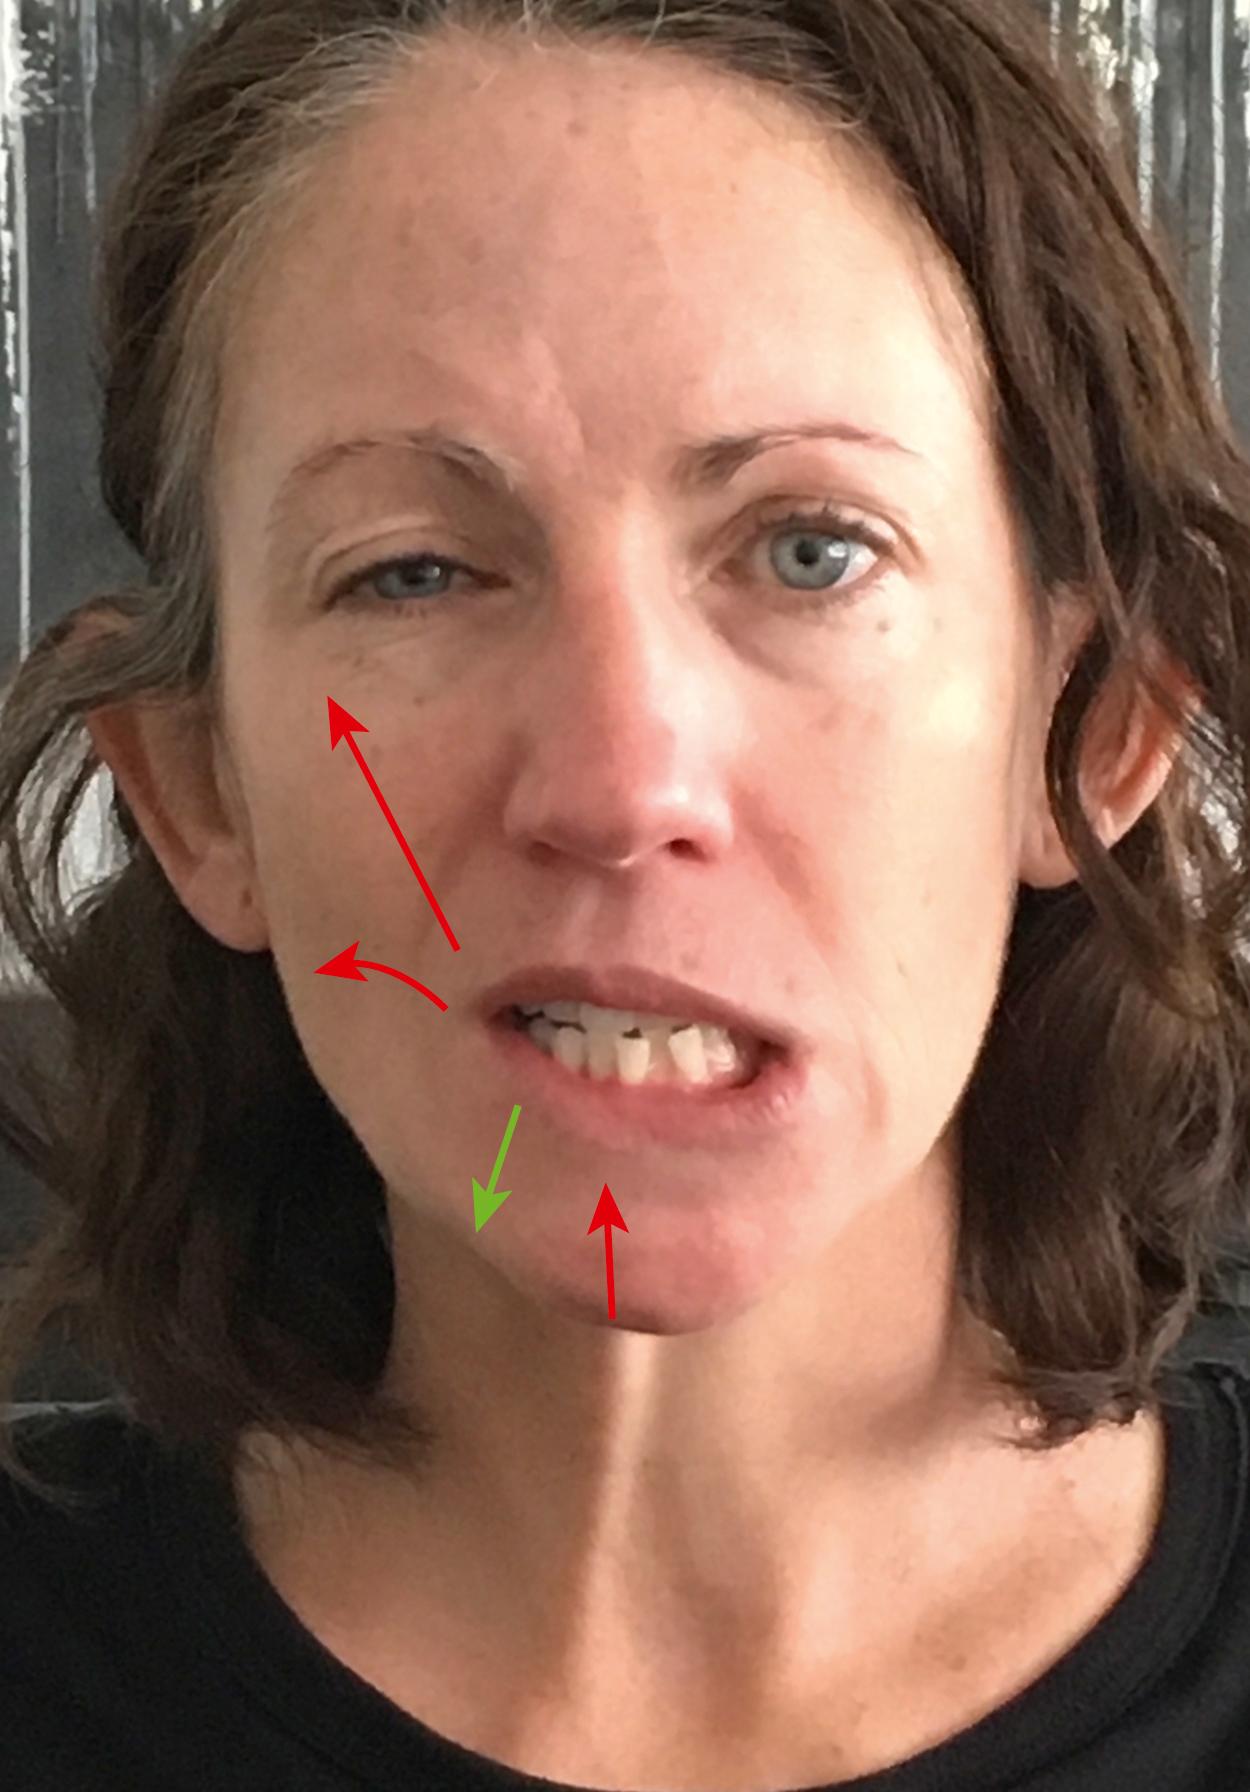 Fig. 9.4, Limited lower lip depression due to synkinetic co-contraction of buccinator and zygomaticus retracting/elevating the lower lip and angle, and mentalis elevating it (red arrows).